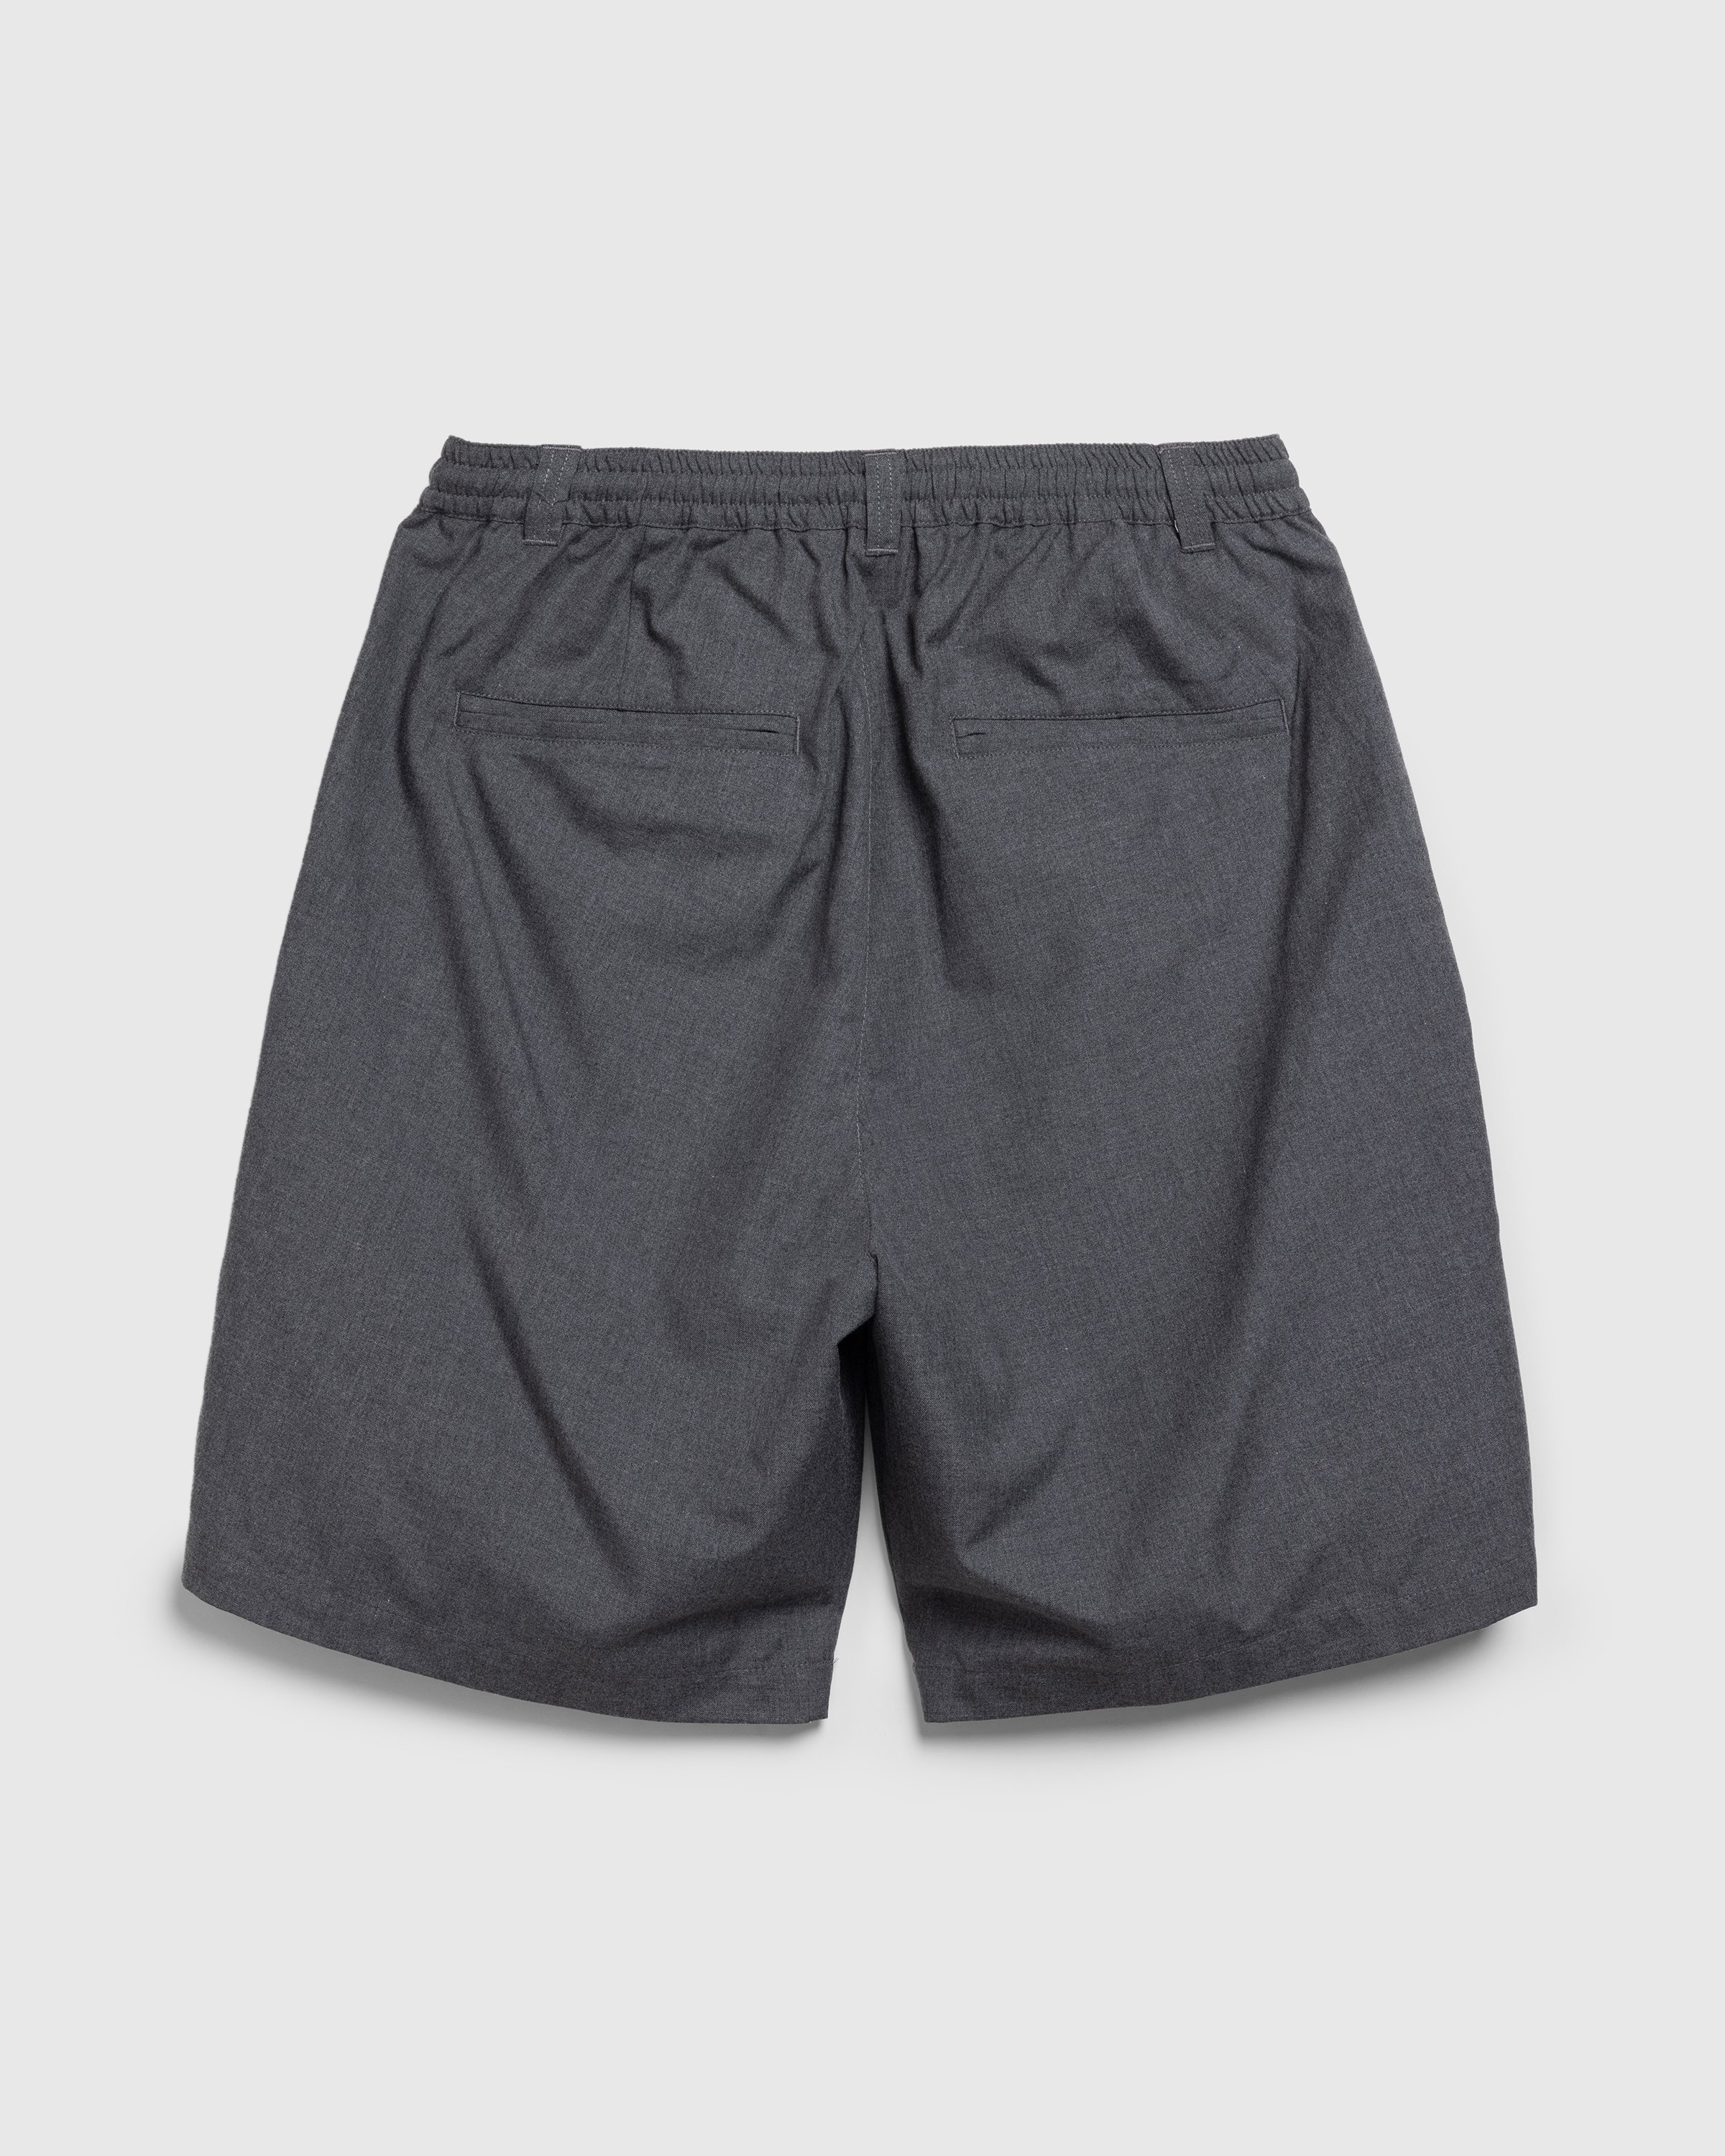 Highsnobiety HS05 - Tropical Suiting Shorts - Clothing - Grey - Image 2